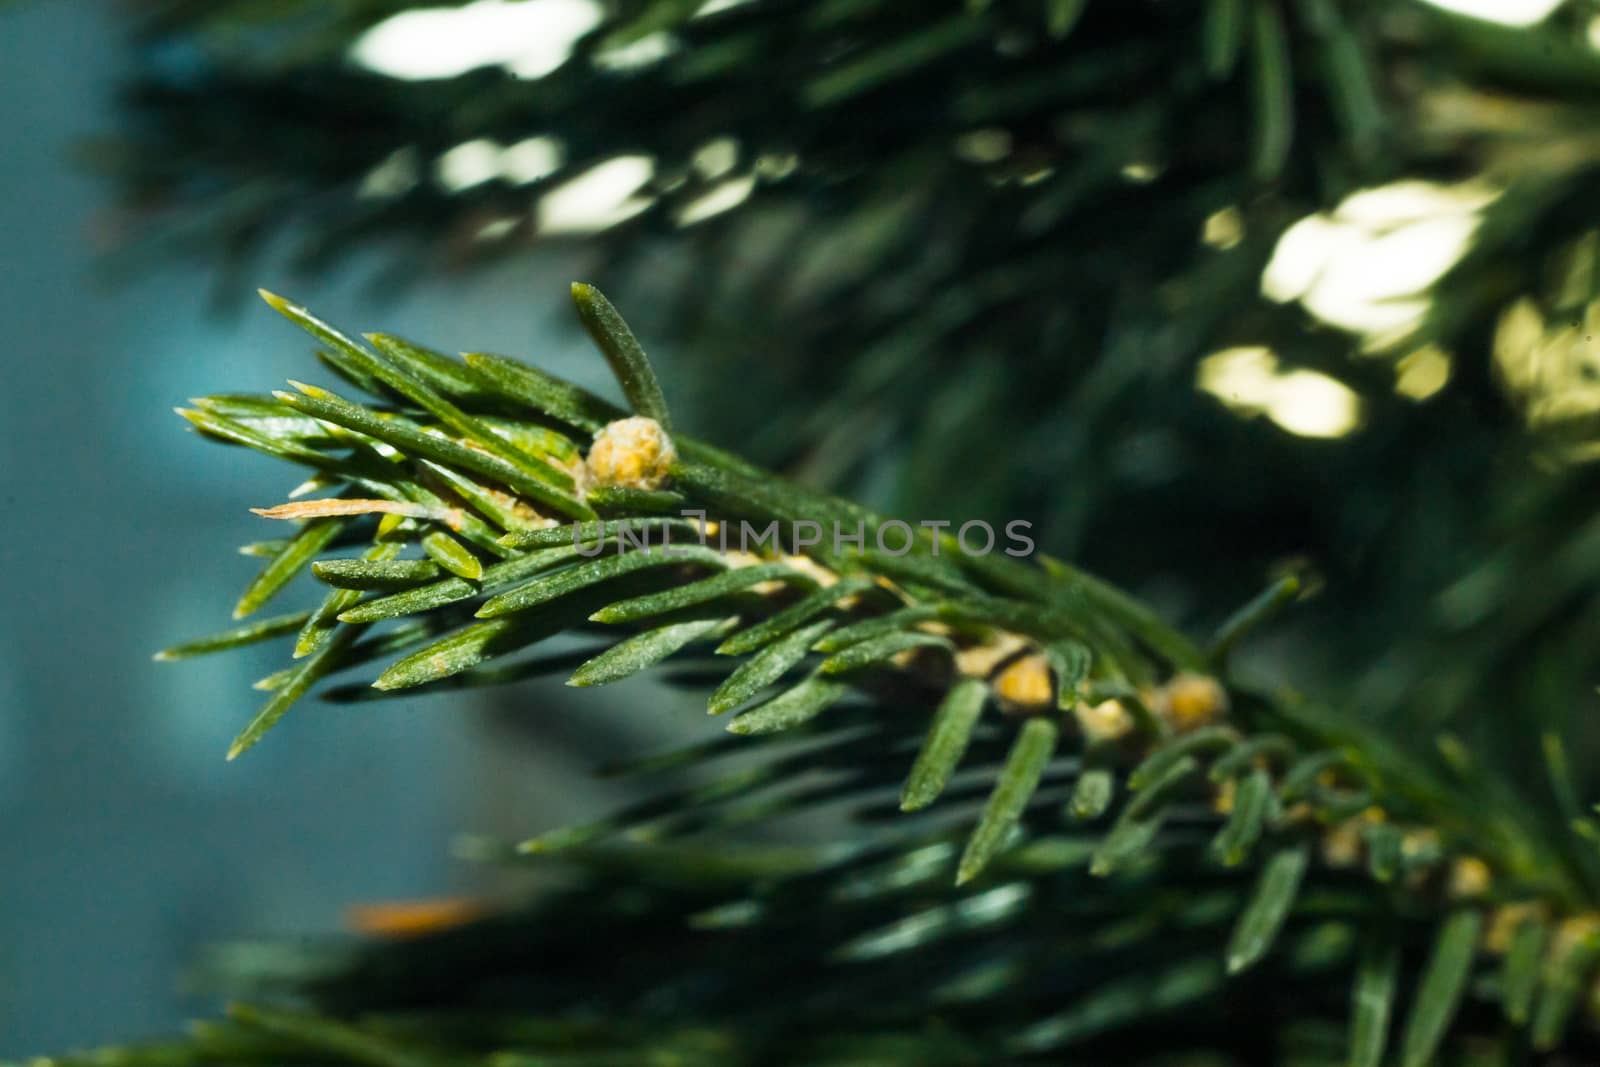 needle pine close-up winter macro photo waiting for the new year